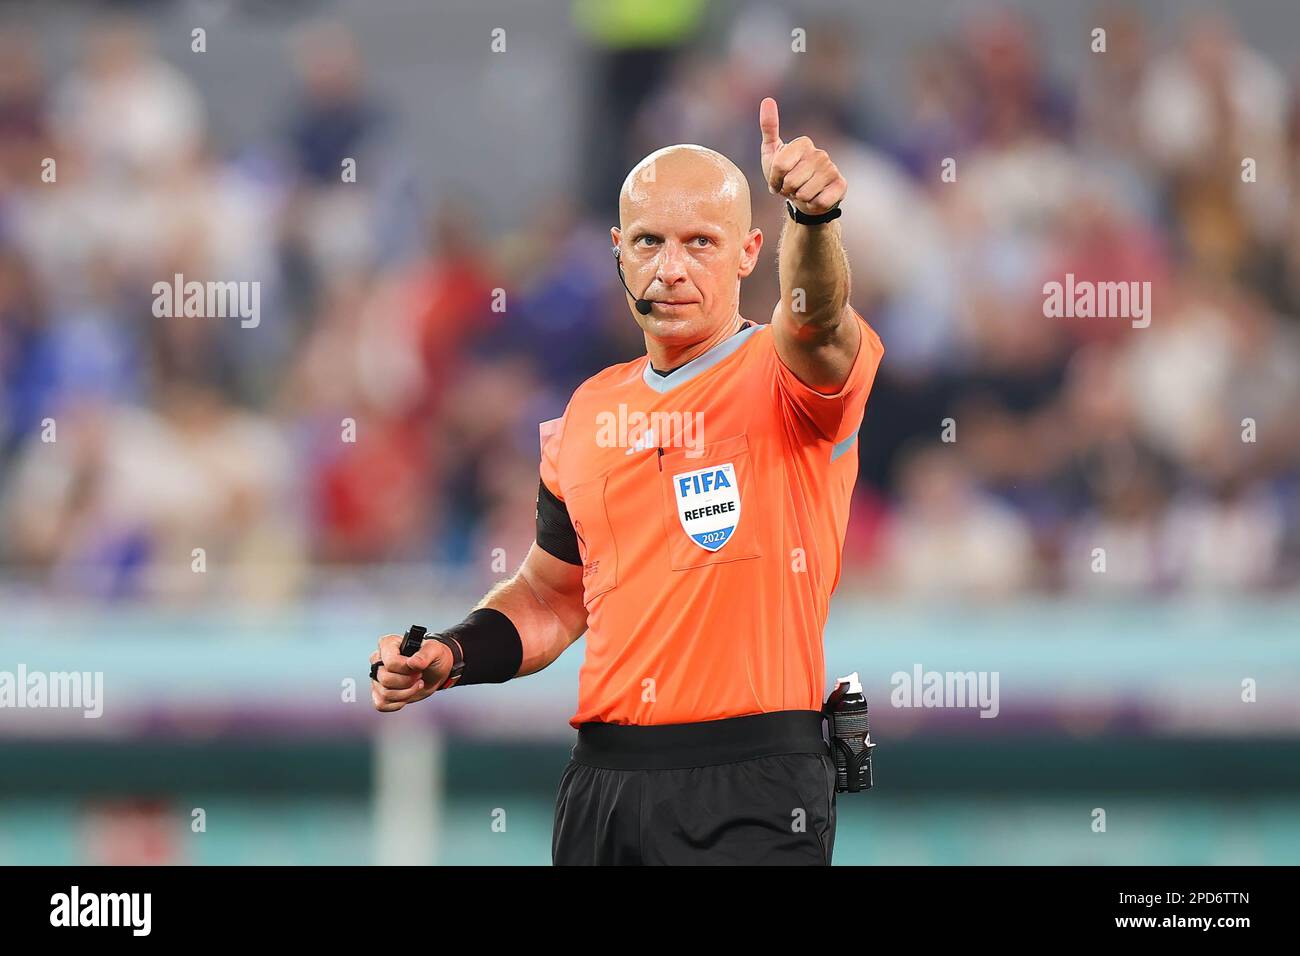 Referee Szymon Marciniak gestures during the FIFA World Cup Qatar 2022 Match between France and Denmark at Stadium 974. Final score: France 2:1 Denmark. Stock Photo